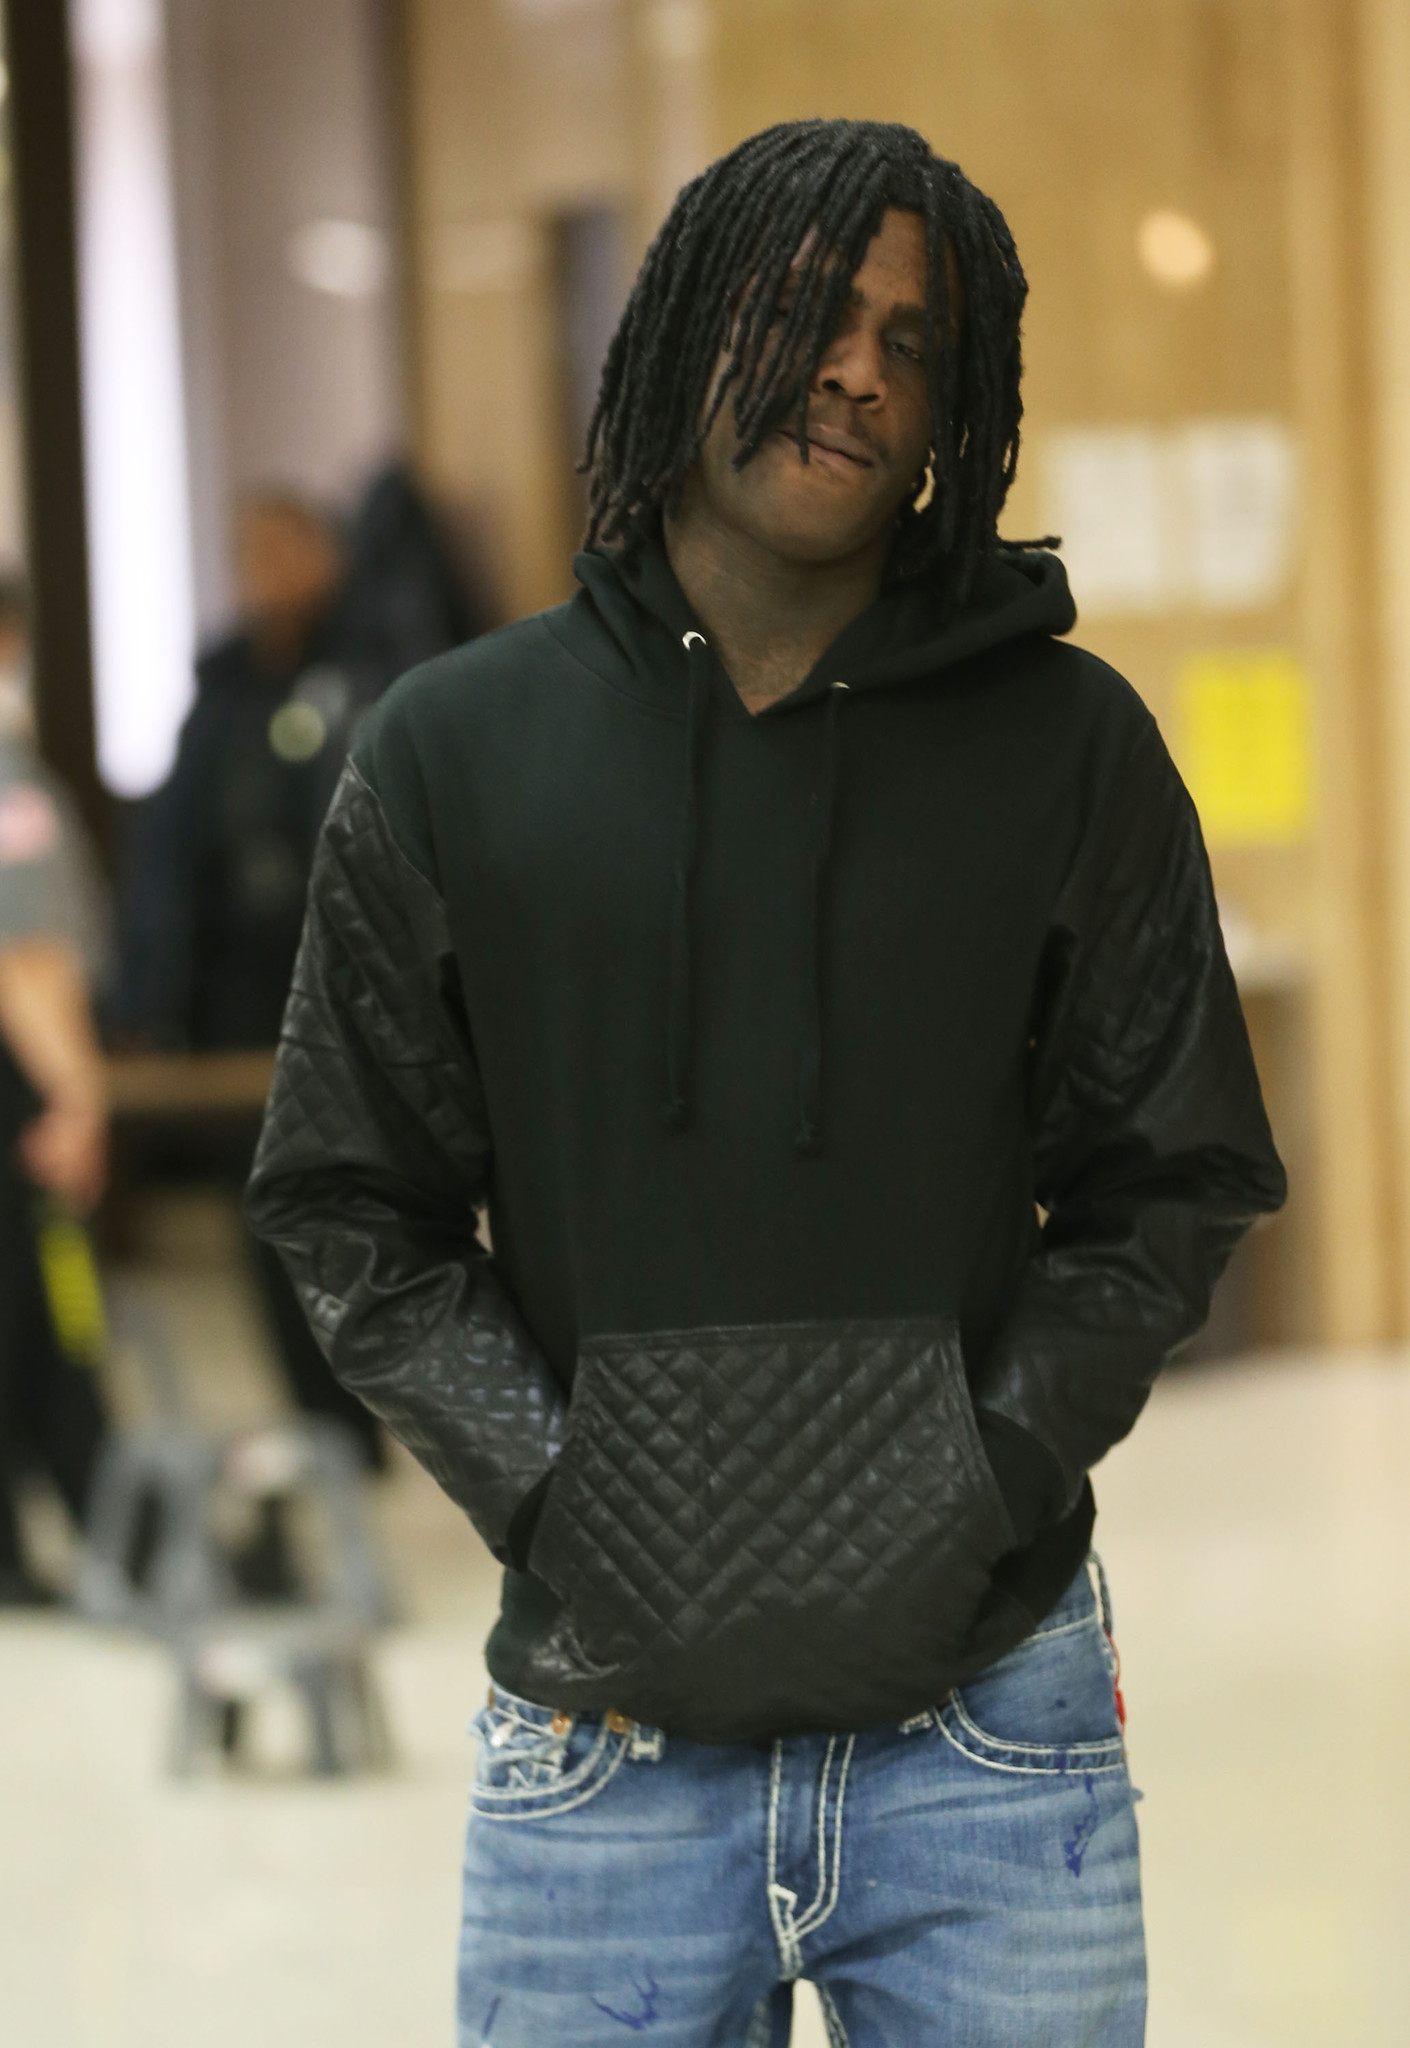 Keith Cozart, also known as the rapper "Chief Keef,"  arrives Friday, May 16, 2014 for a DUI pre-trial hearing at Lake County Courthouse. (Chris Walker/Chicago Tribune)   ....OUTSIDE TRIBUNE CO.- NO MAGS,  NO SALES, NO INTERNET, NO TV, CHICAGO OUT, NO DIGITAL MANIPULATION...